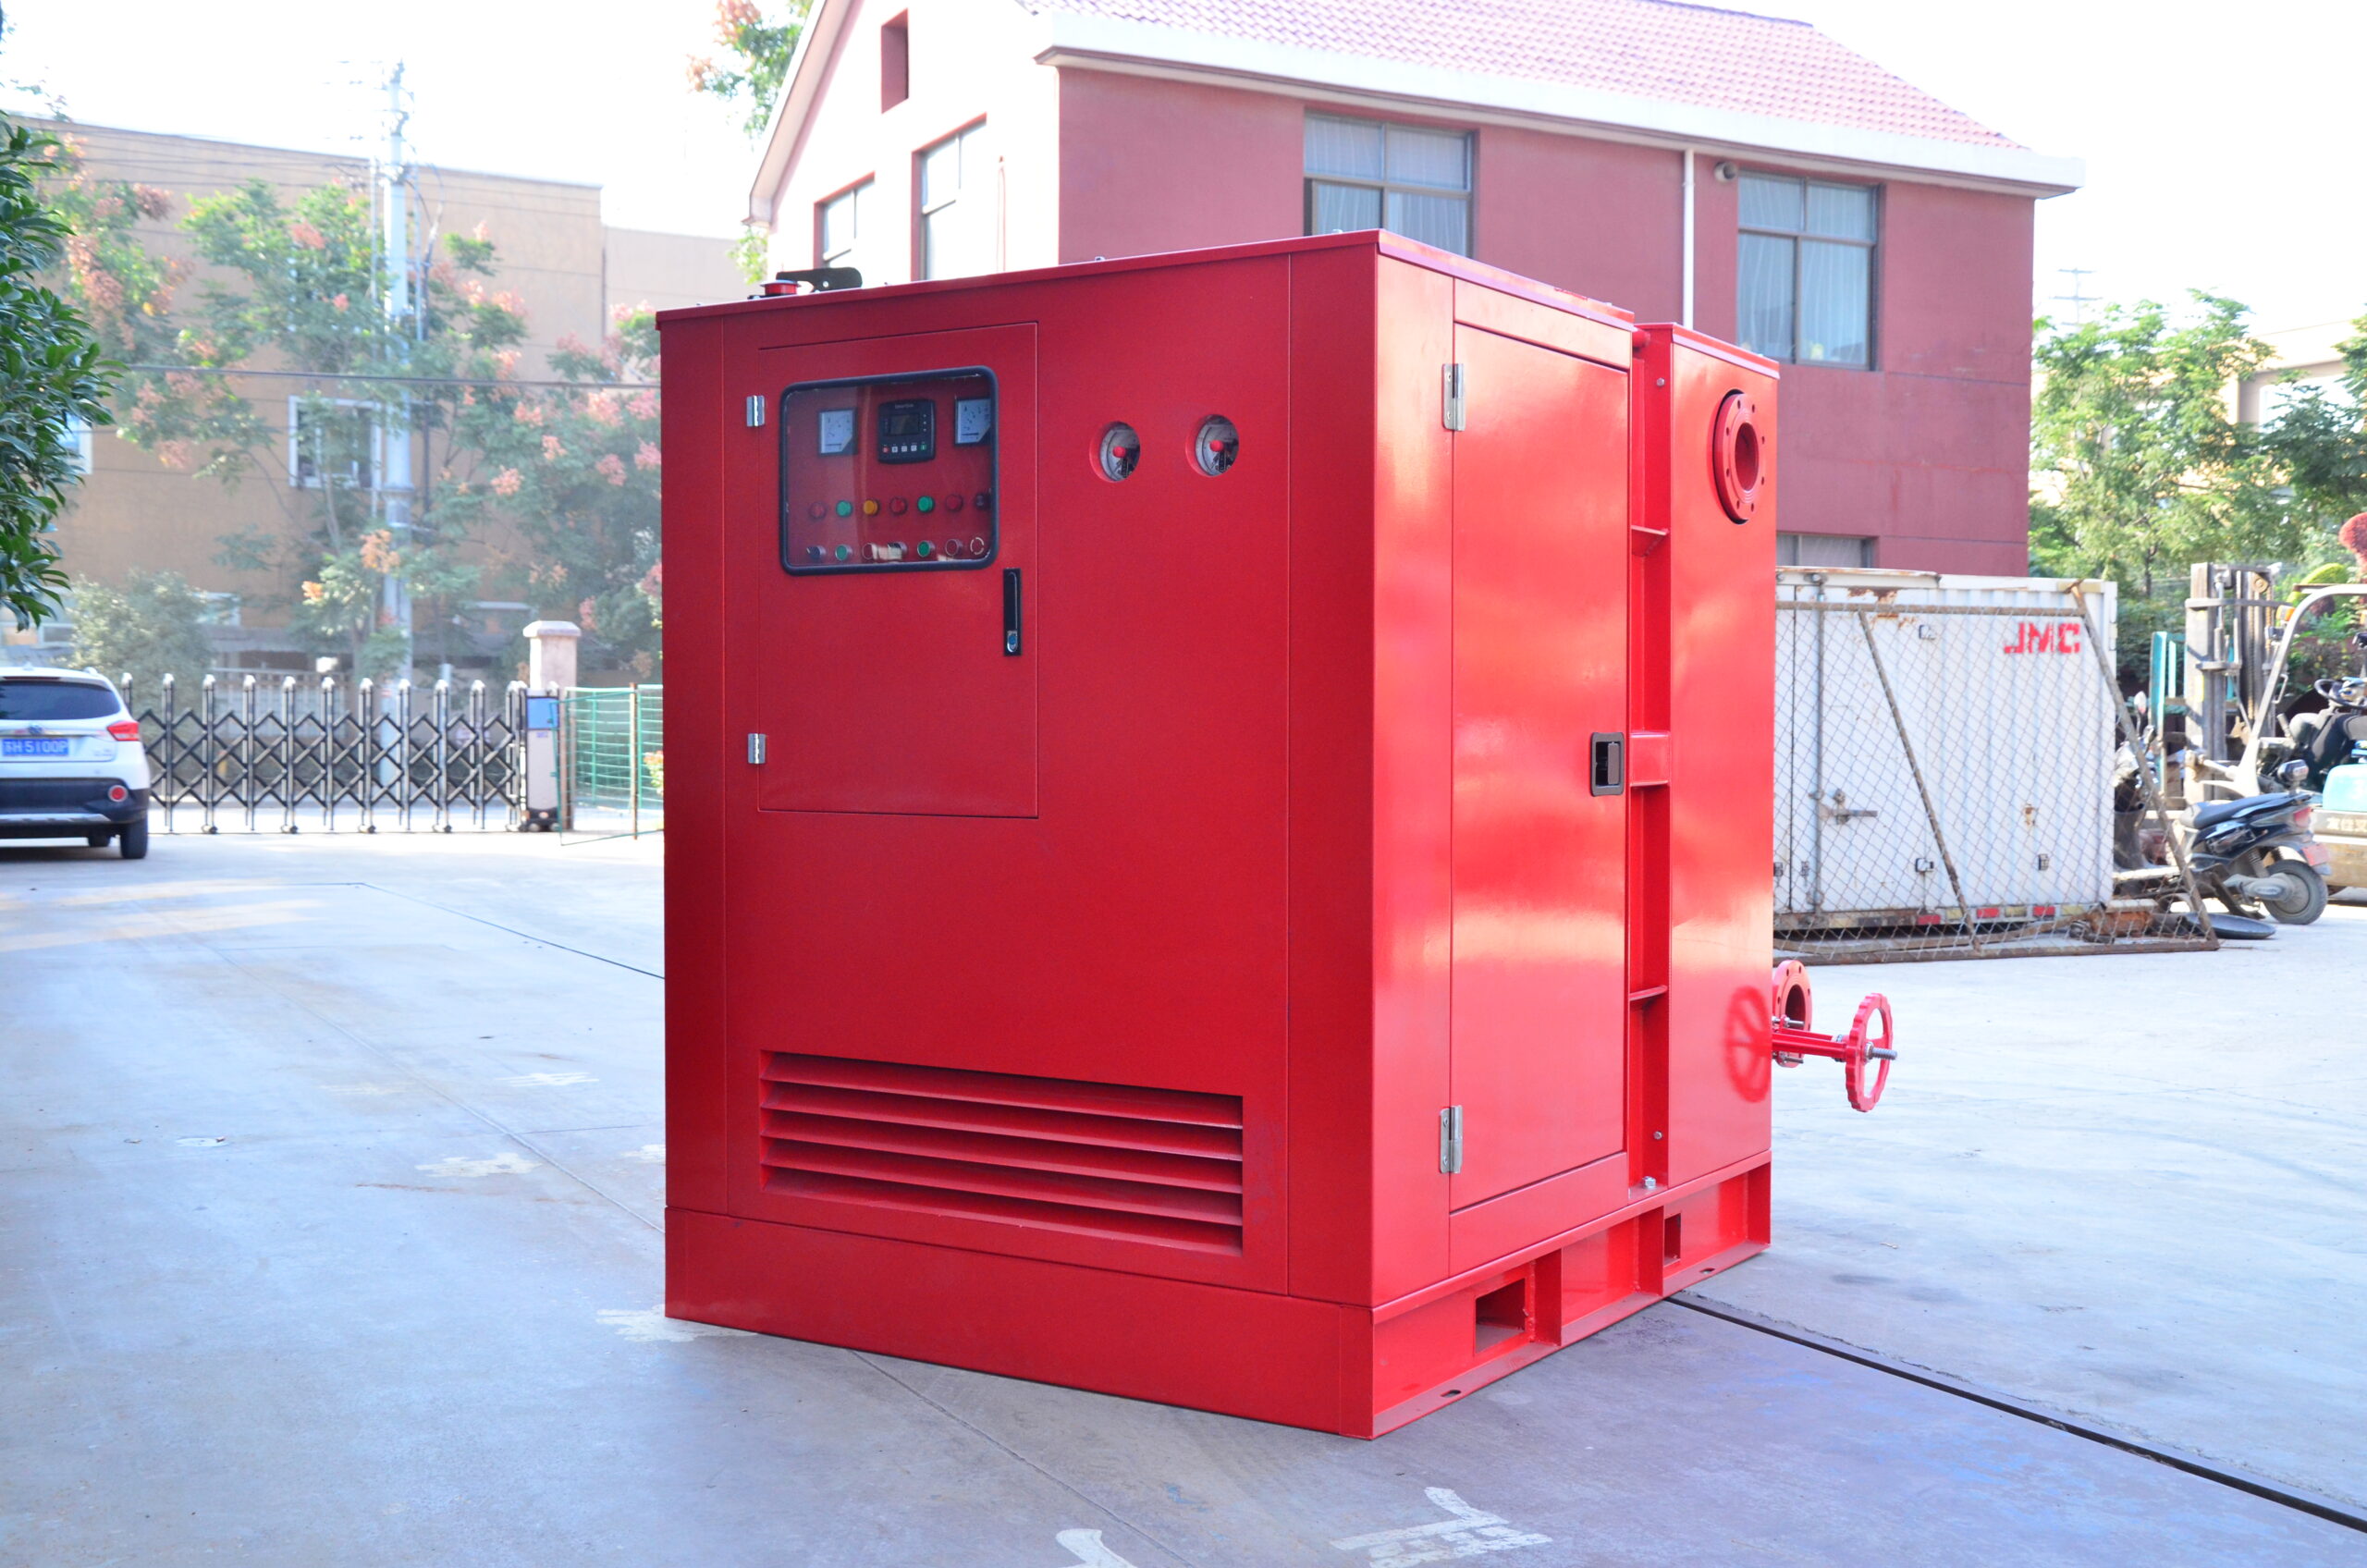 Are there specific regulations governing fire pump installation and operation?